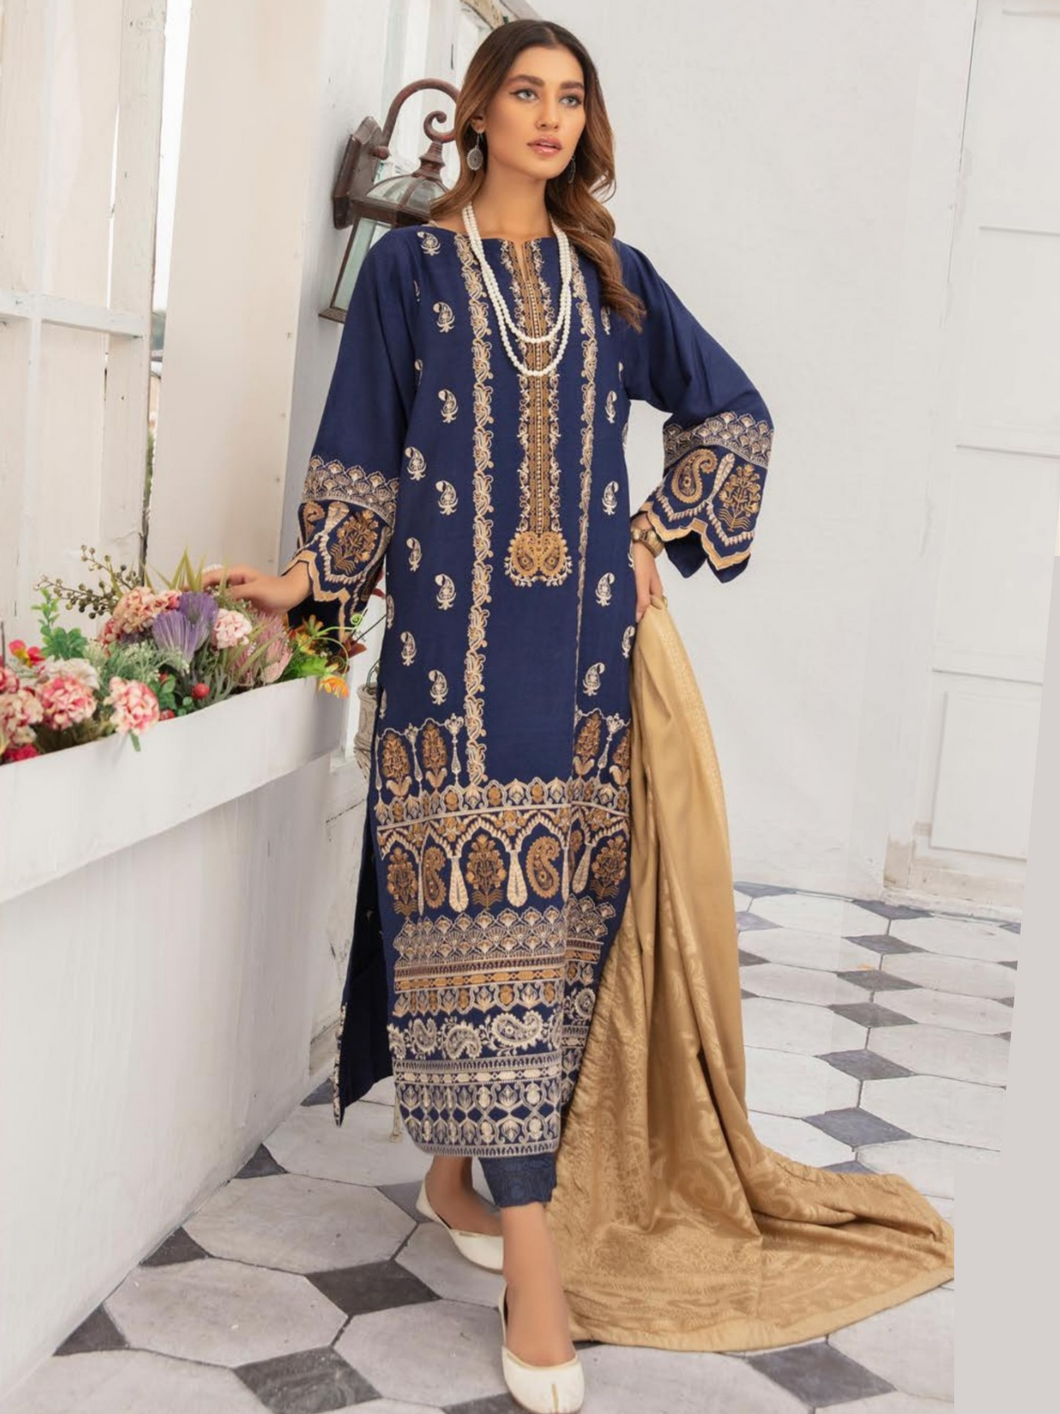 Johra Nafees Embroidered Marina Peach Winter Collection JR 623